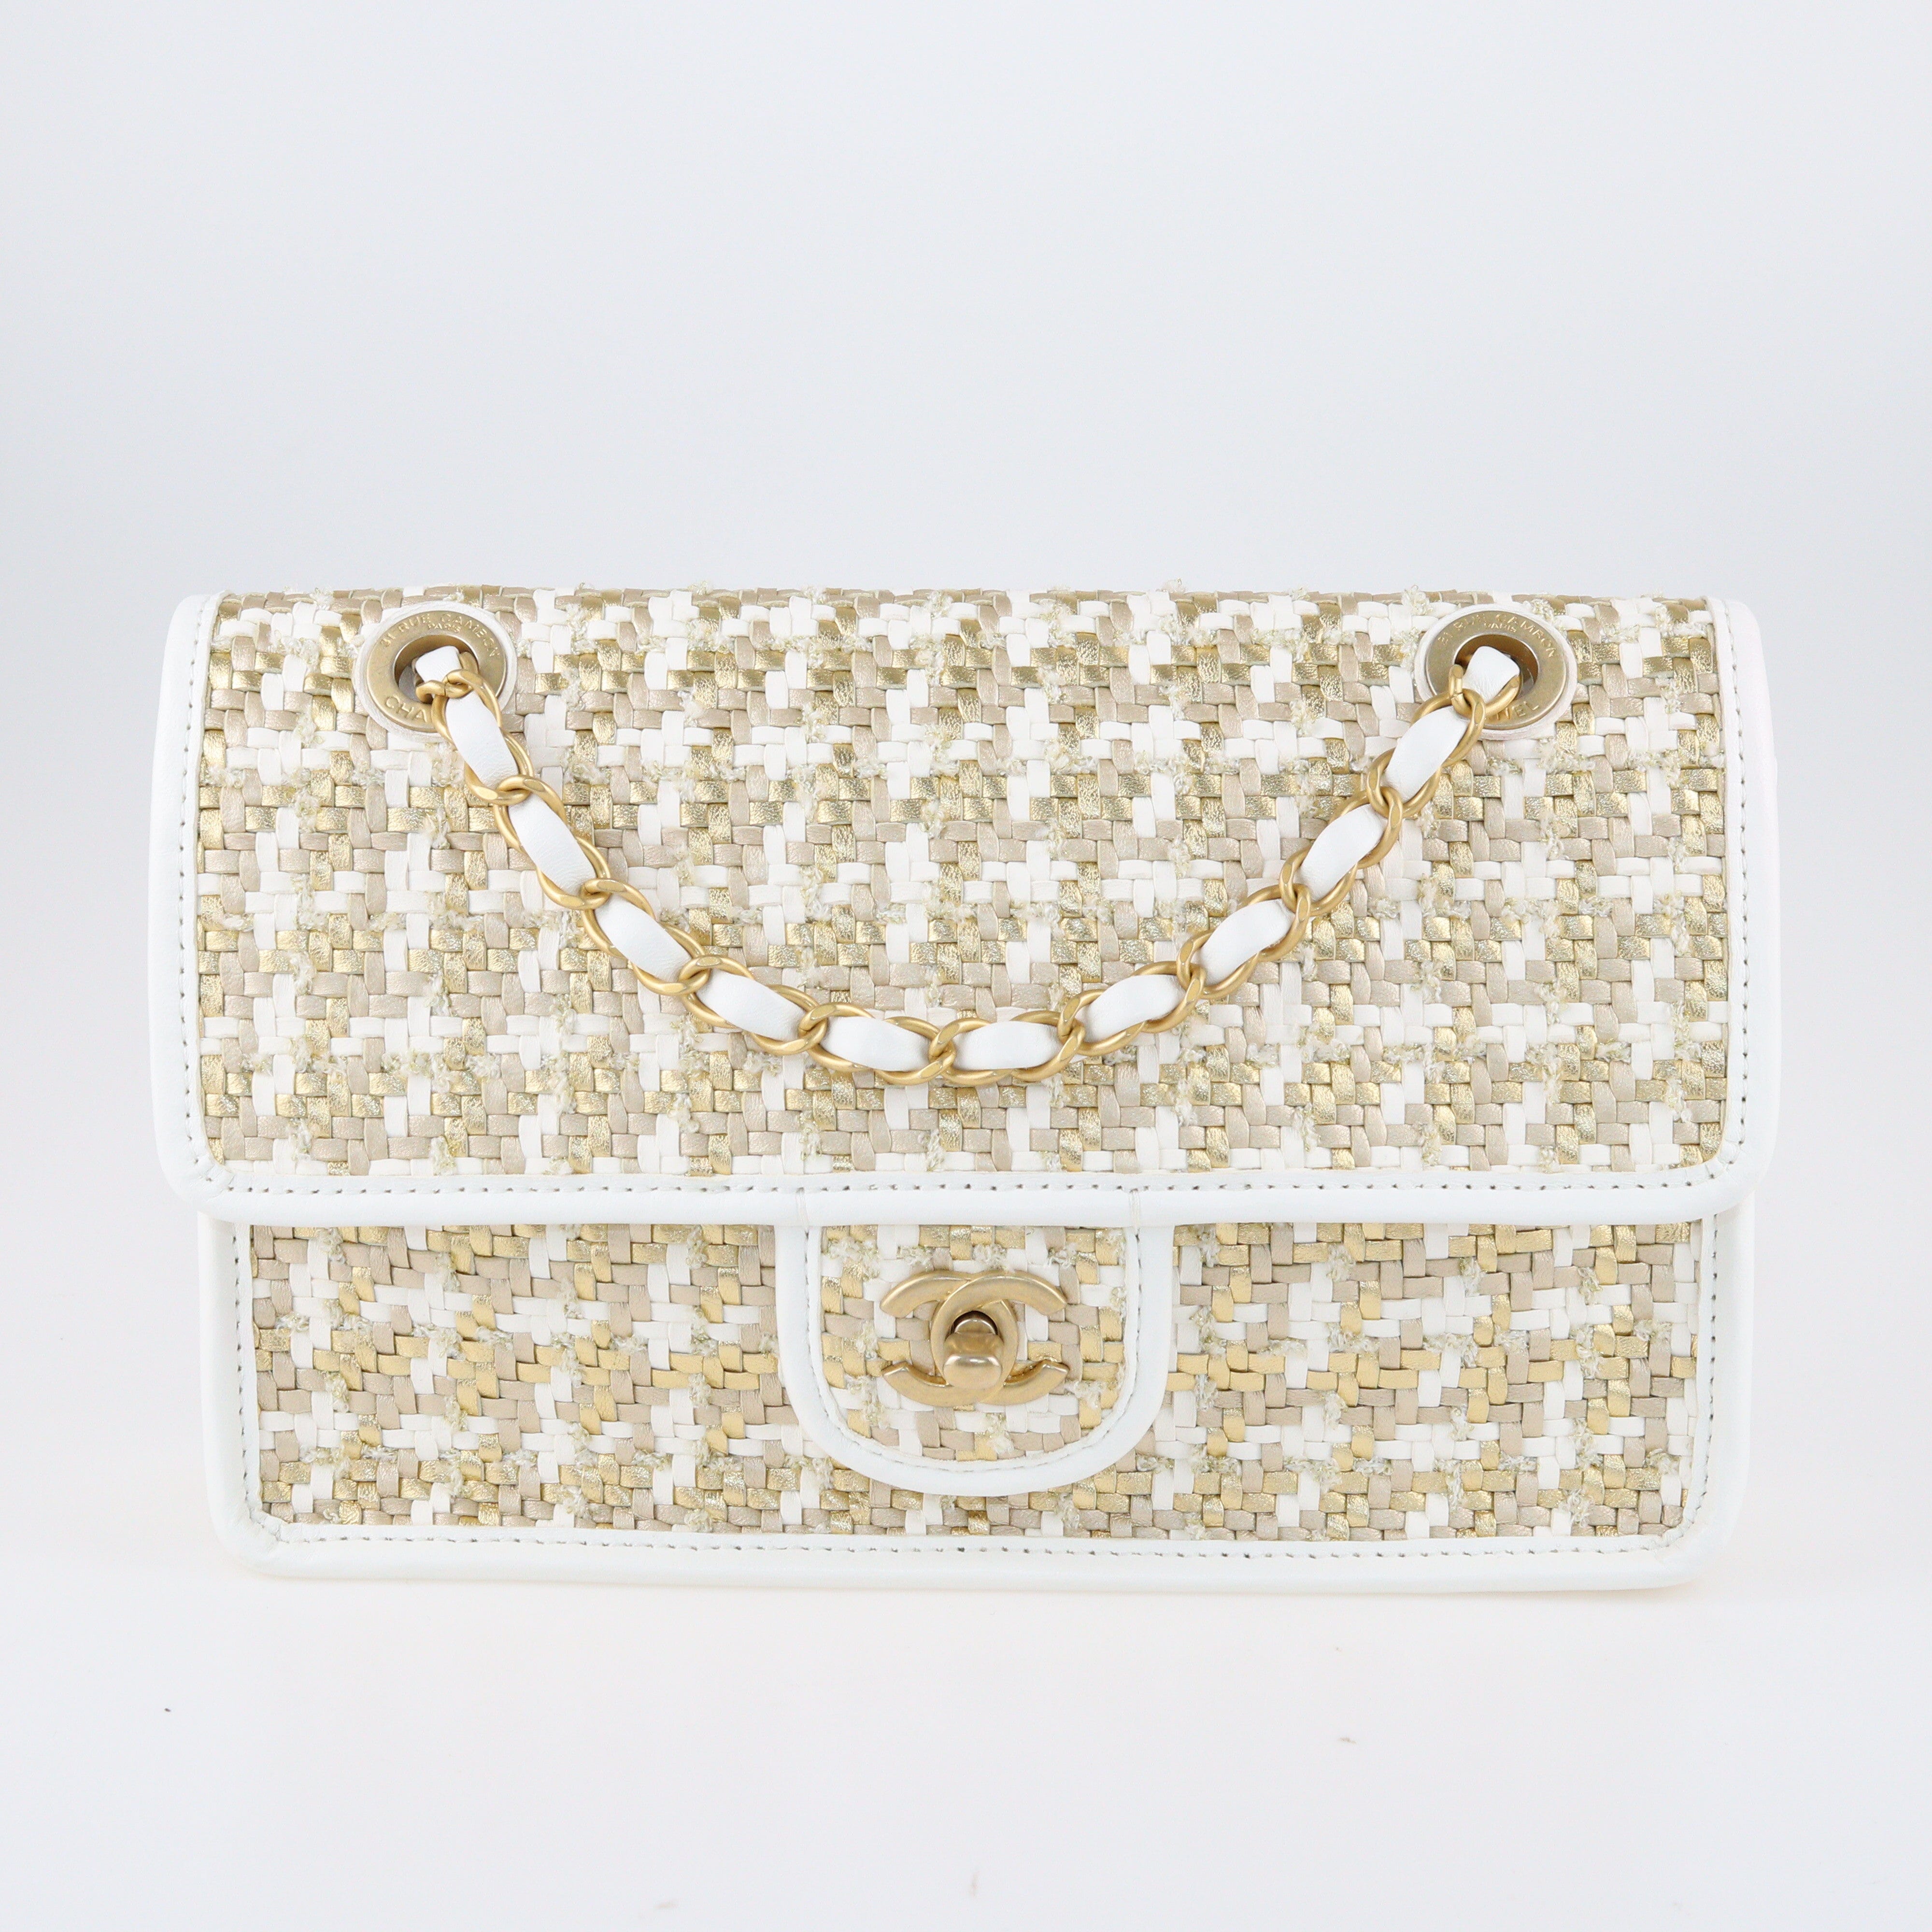 Gold/White Woven Flap Bag Bags Chanel 